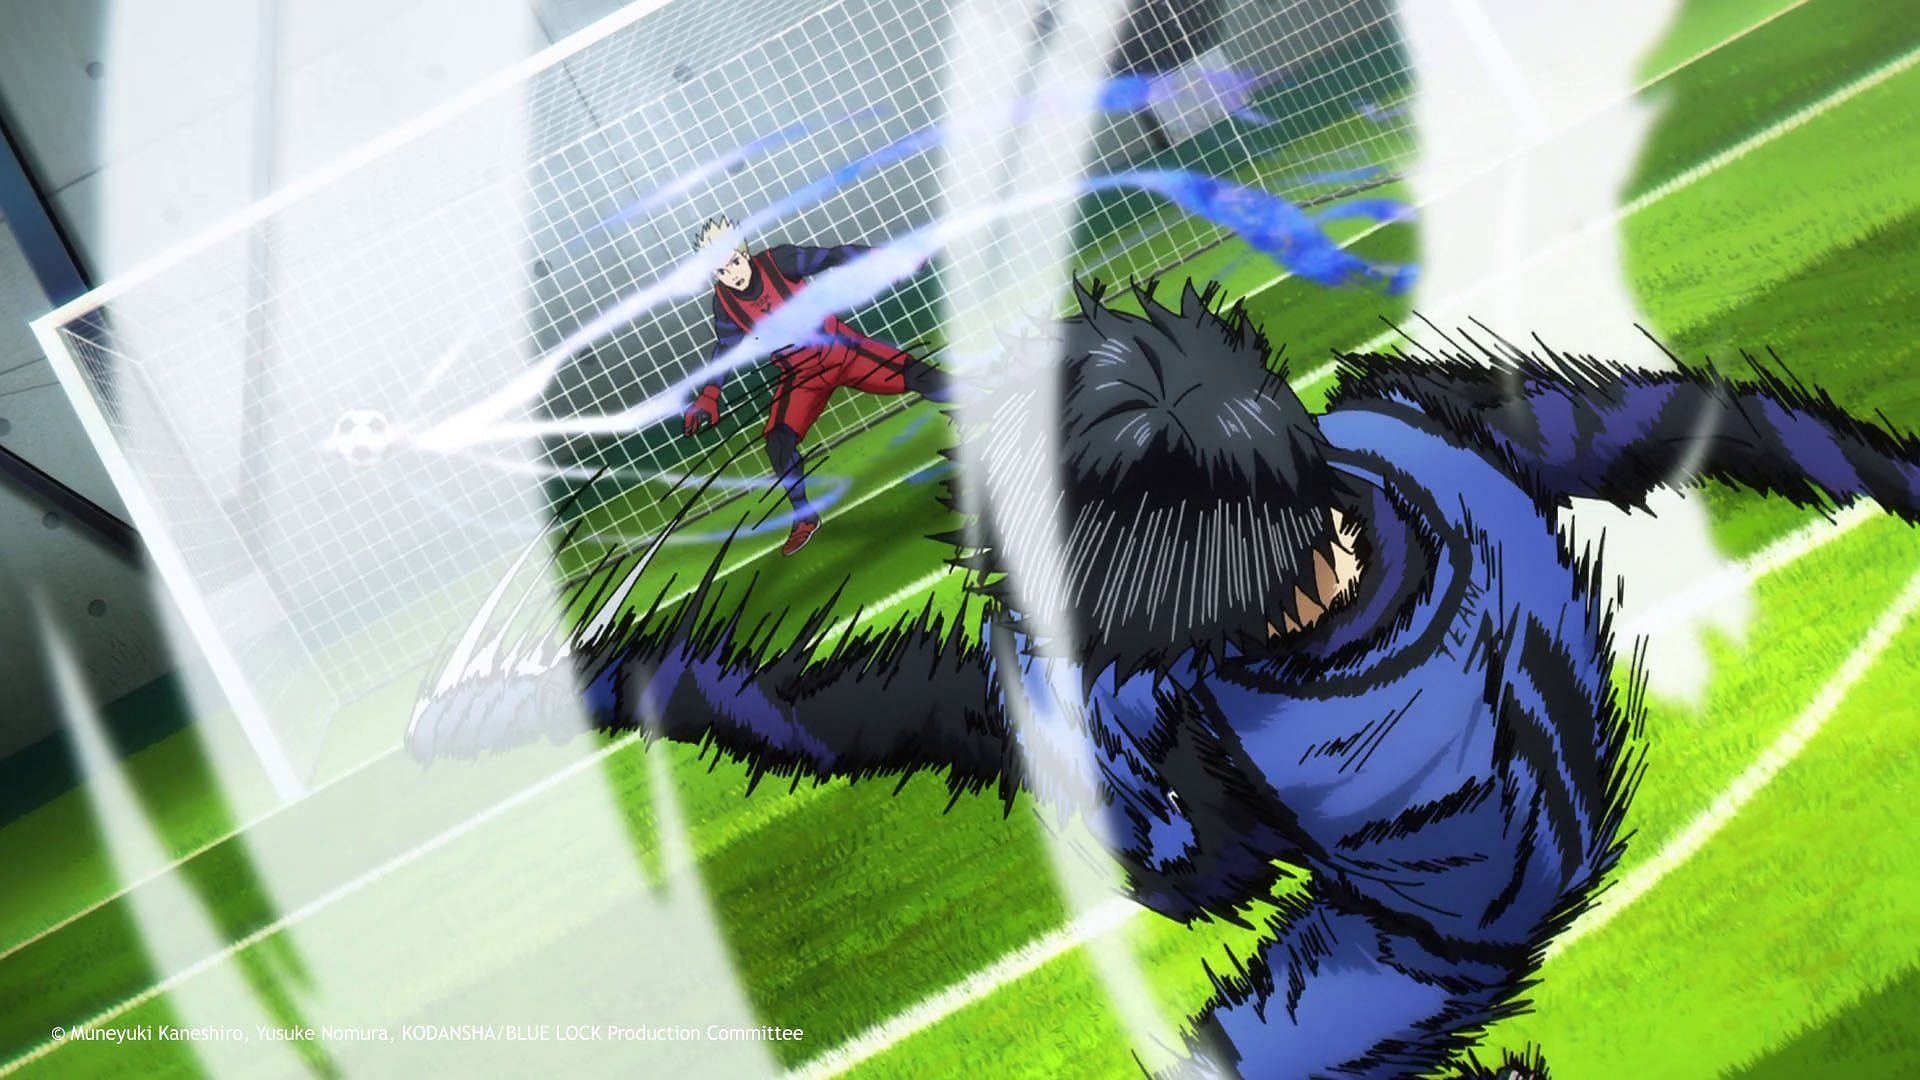 Blue Lock' Anime Trailer Has Us Excited About The Soccer Meets 'Squid Game'  Vibes